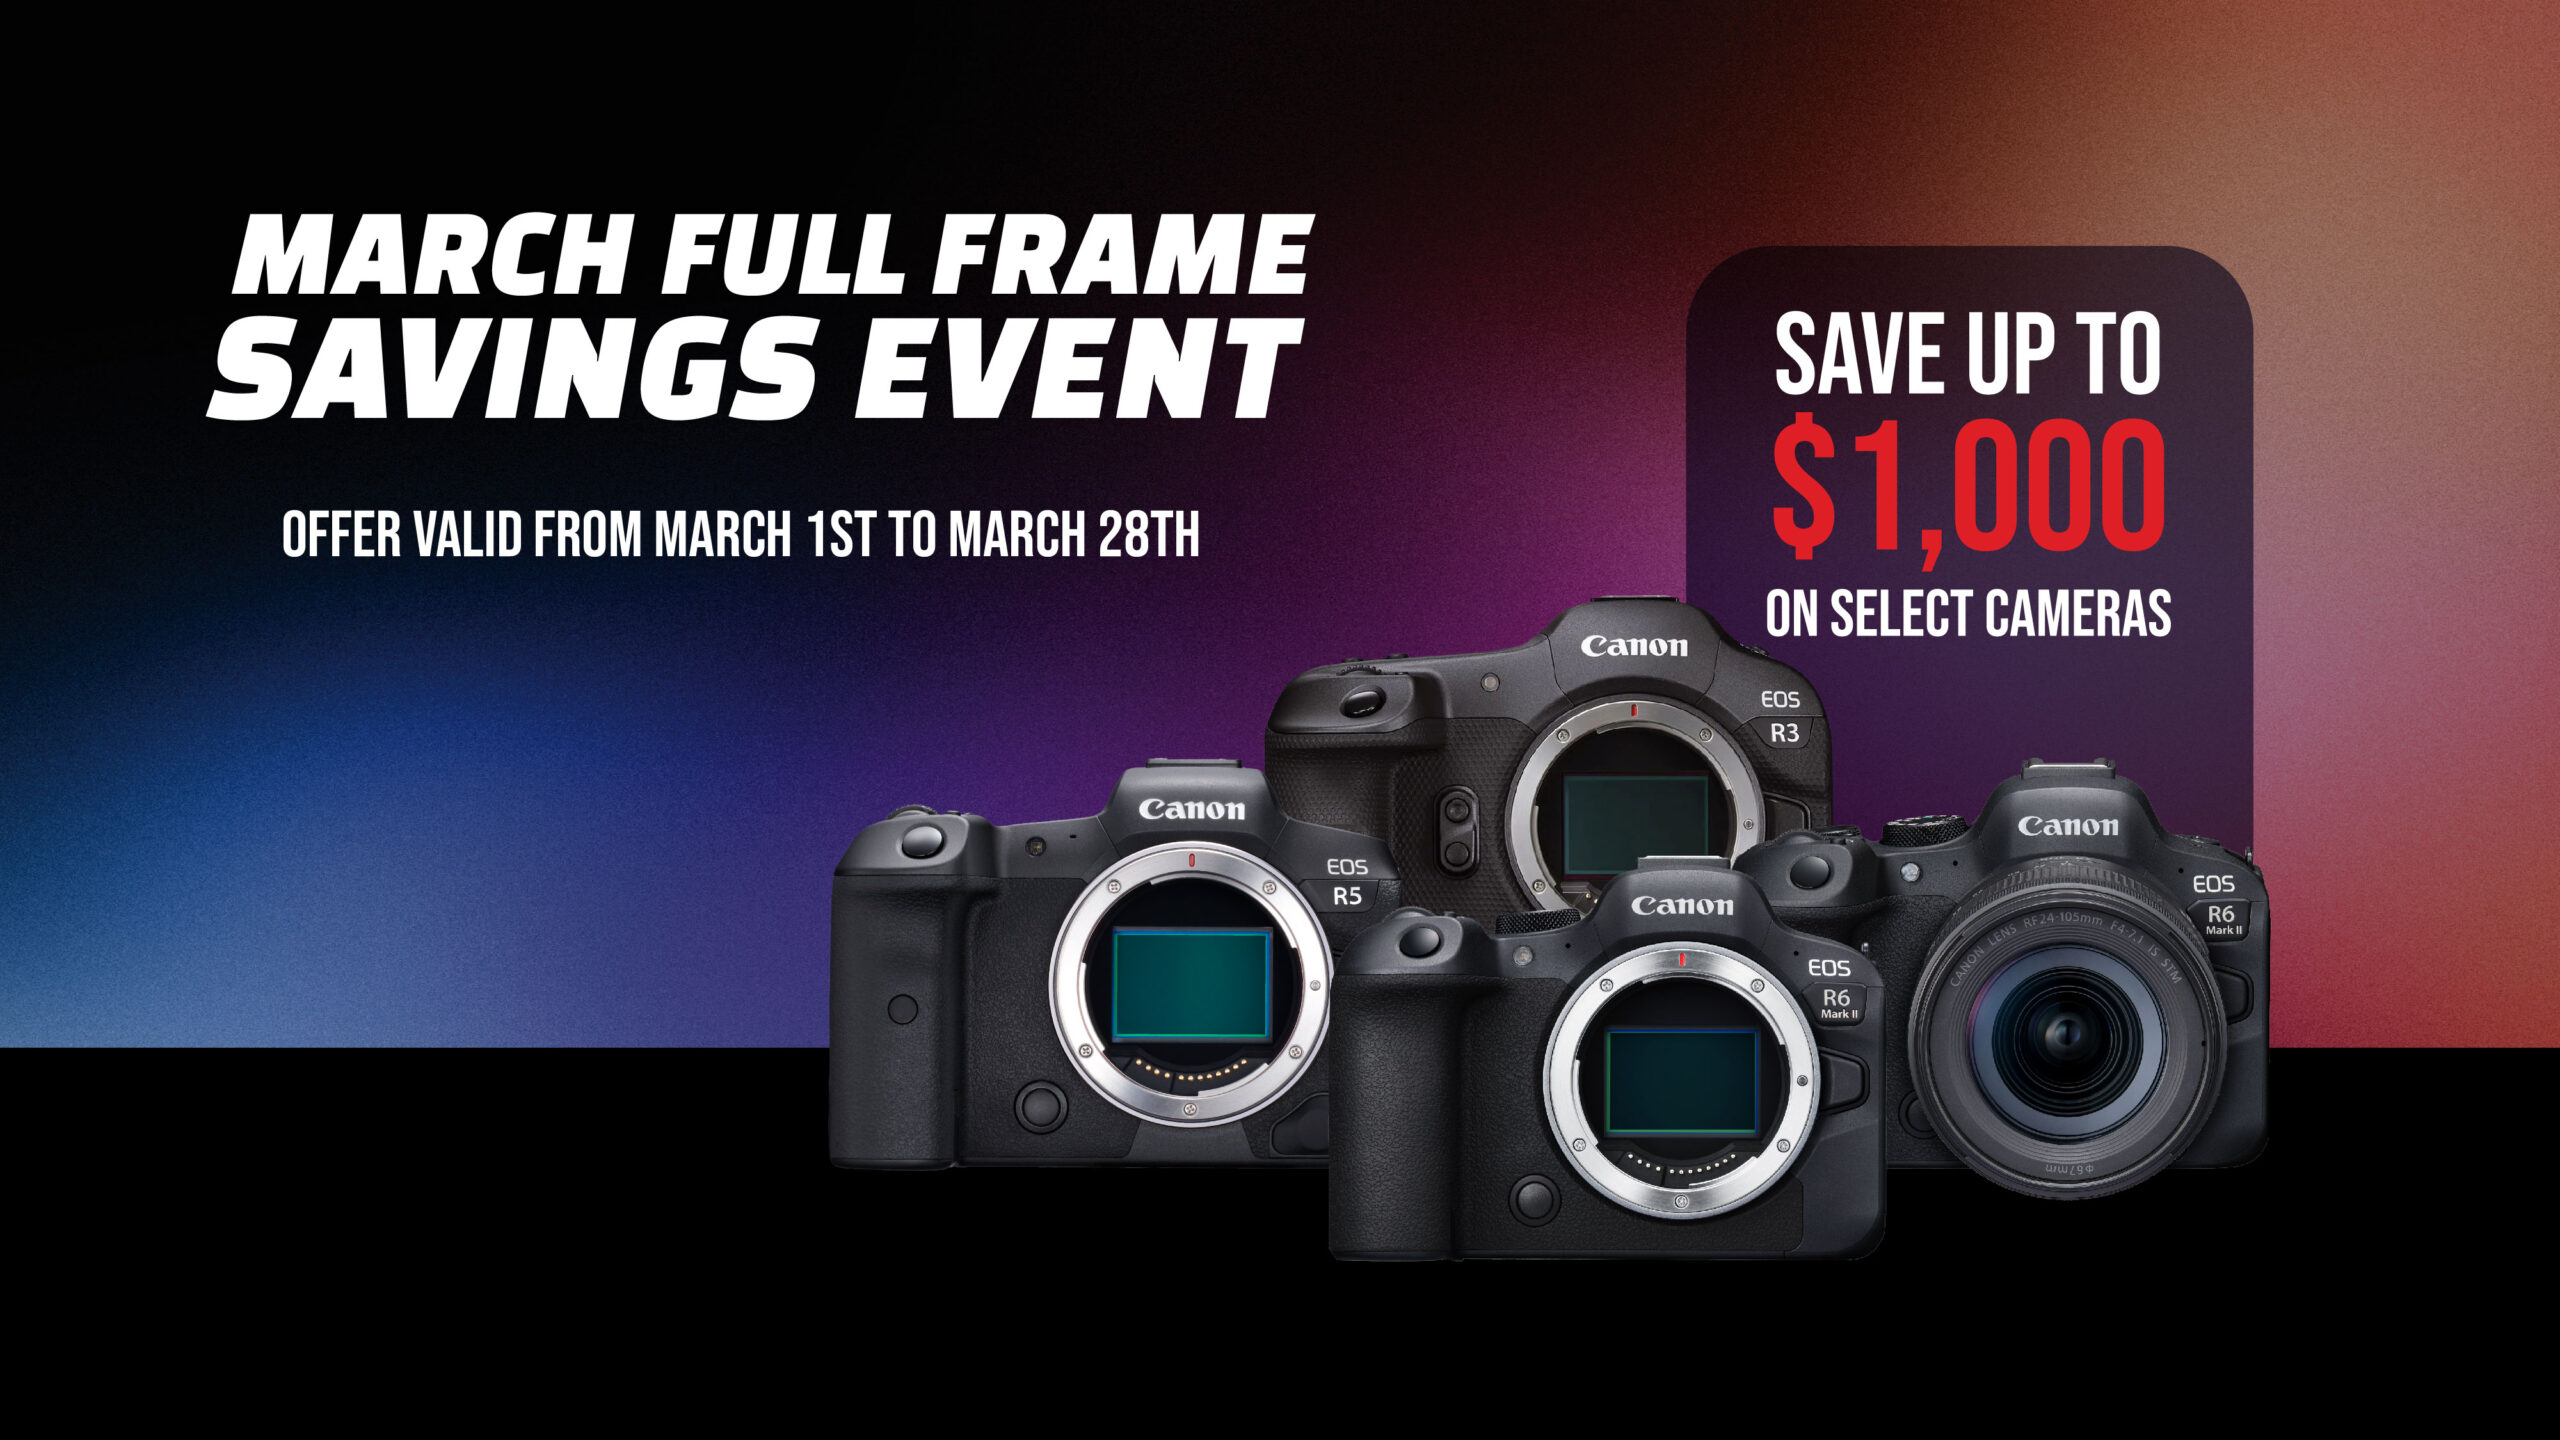 March Full Frame Savings. Save up to $1000 on select cameras.